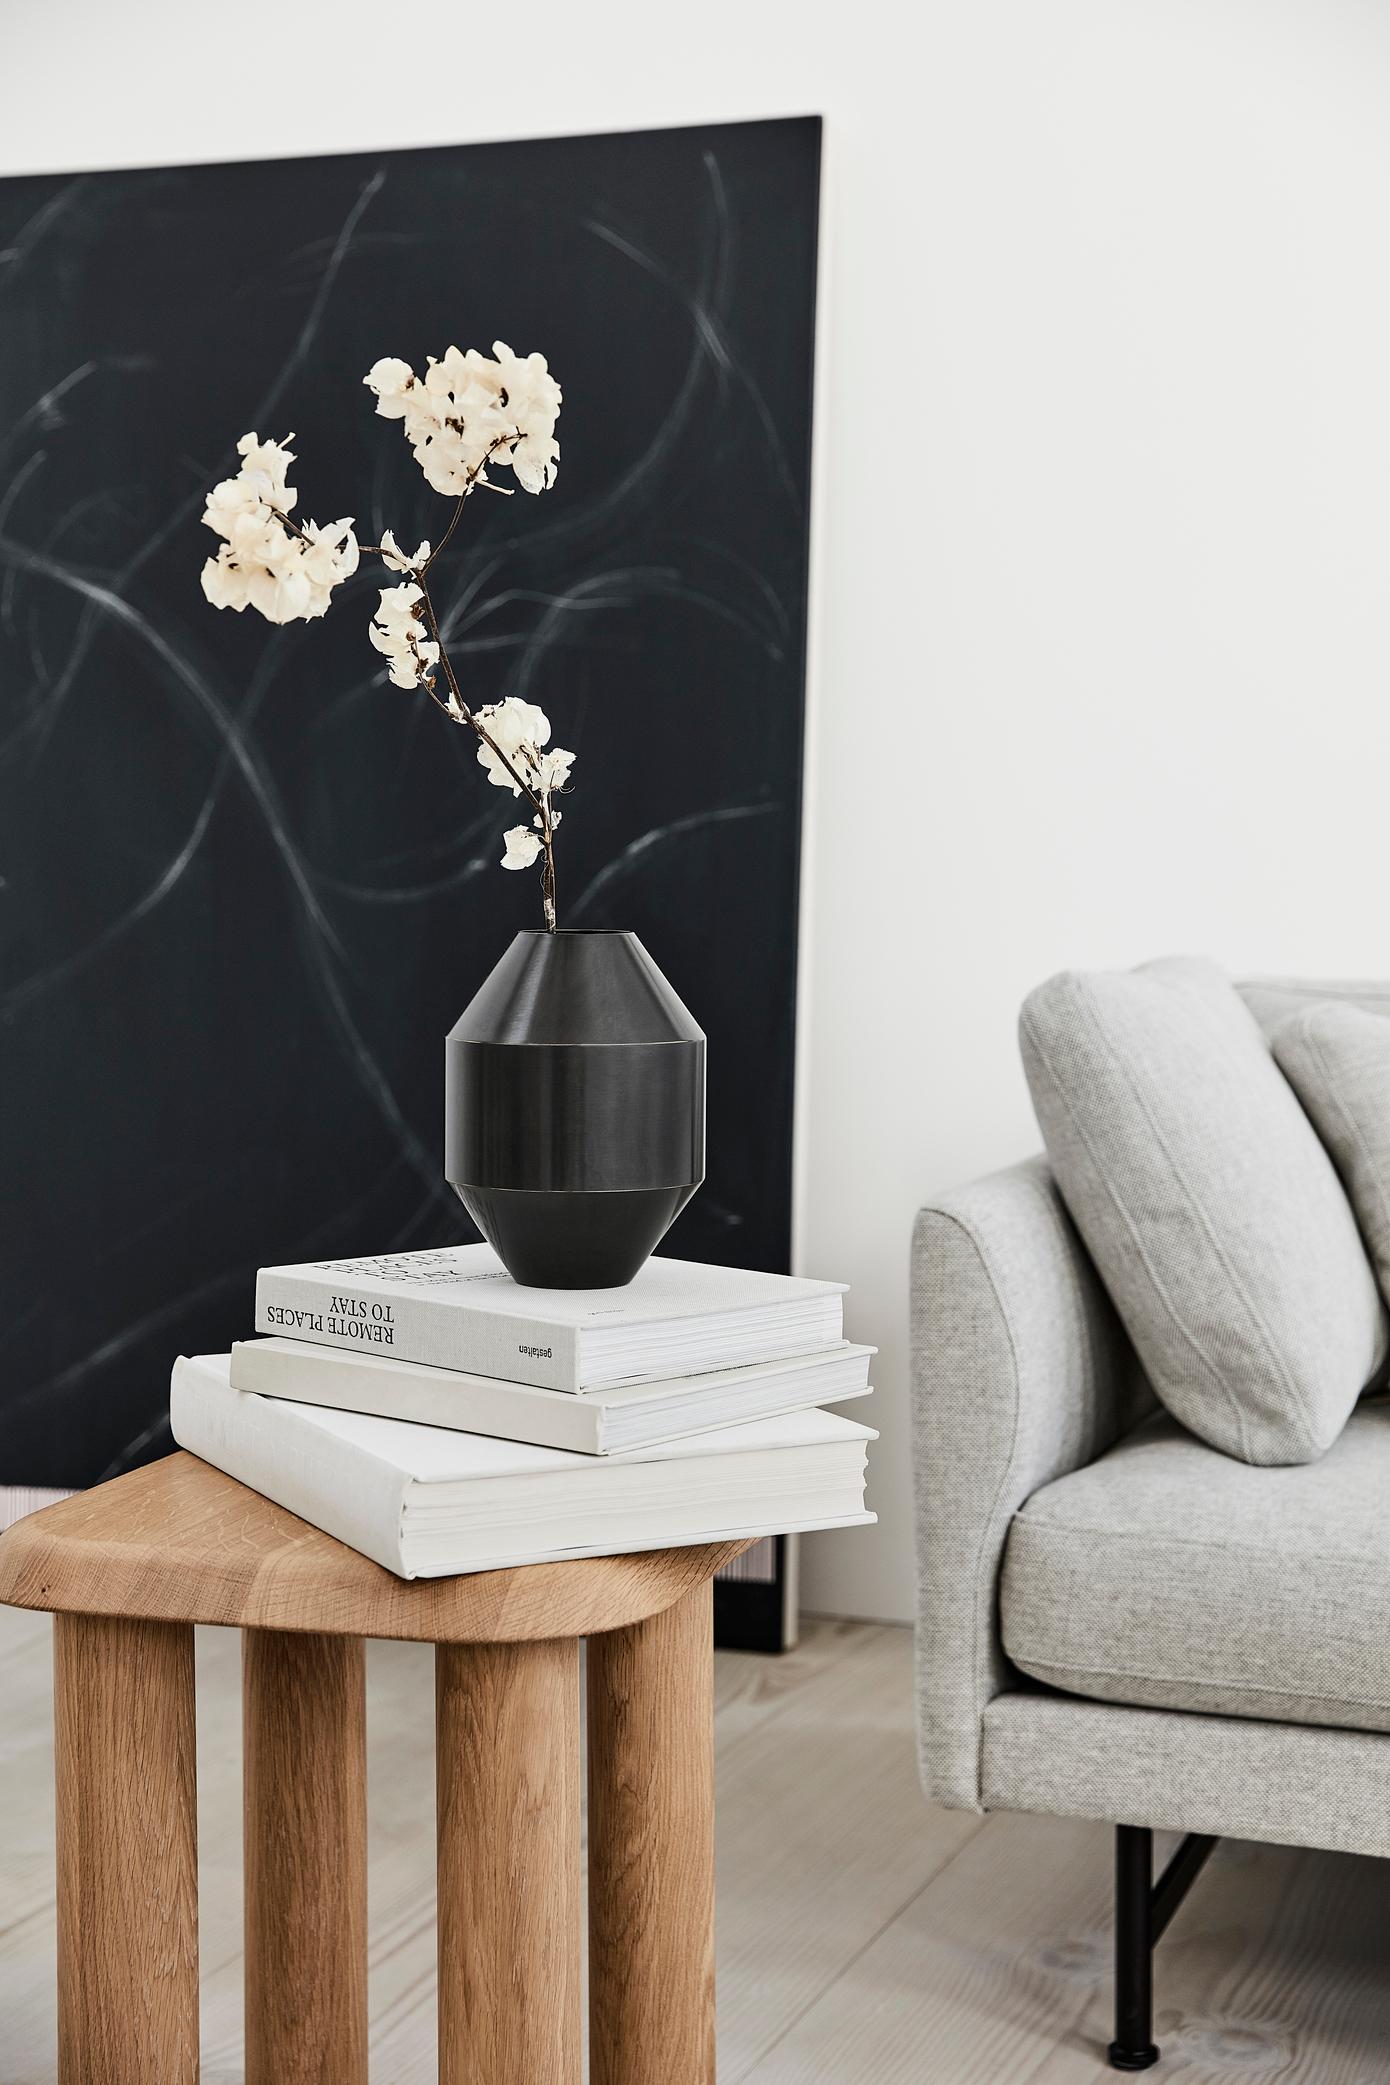 Referencing classic ceramic vases and ancient Greek vessels, the Hydro Vase makes a modern statement that incorporates the material properties and appeal of brass. Chosen because it can be shaped in ways that resemble iconic pottery, brass exudes